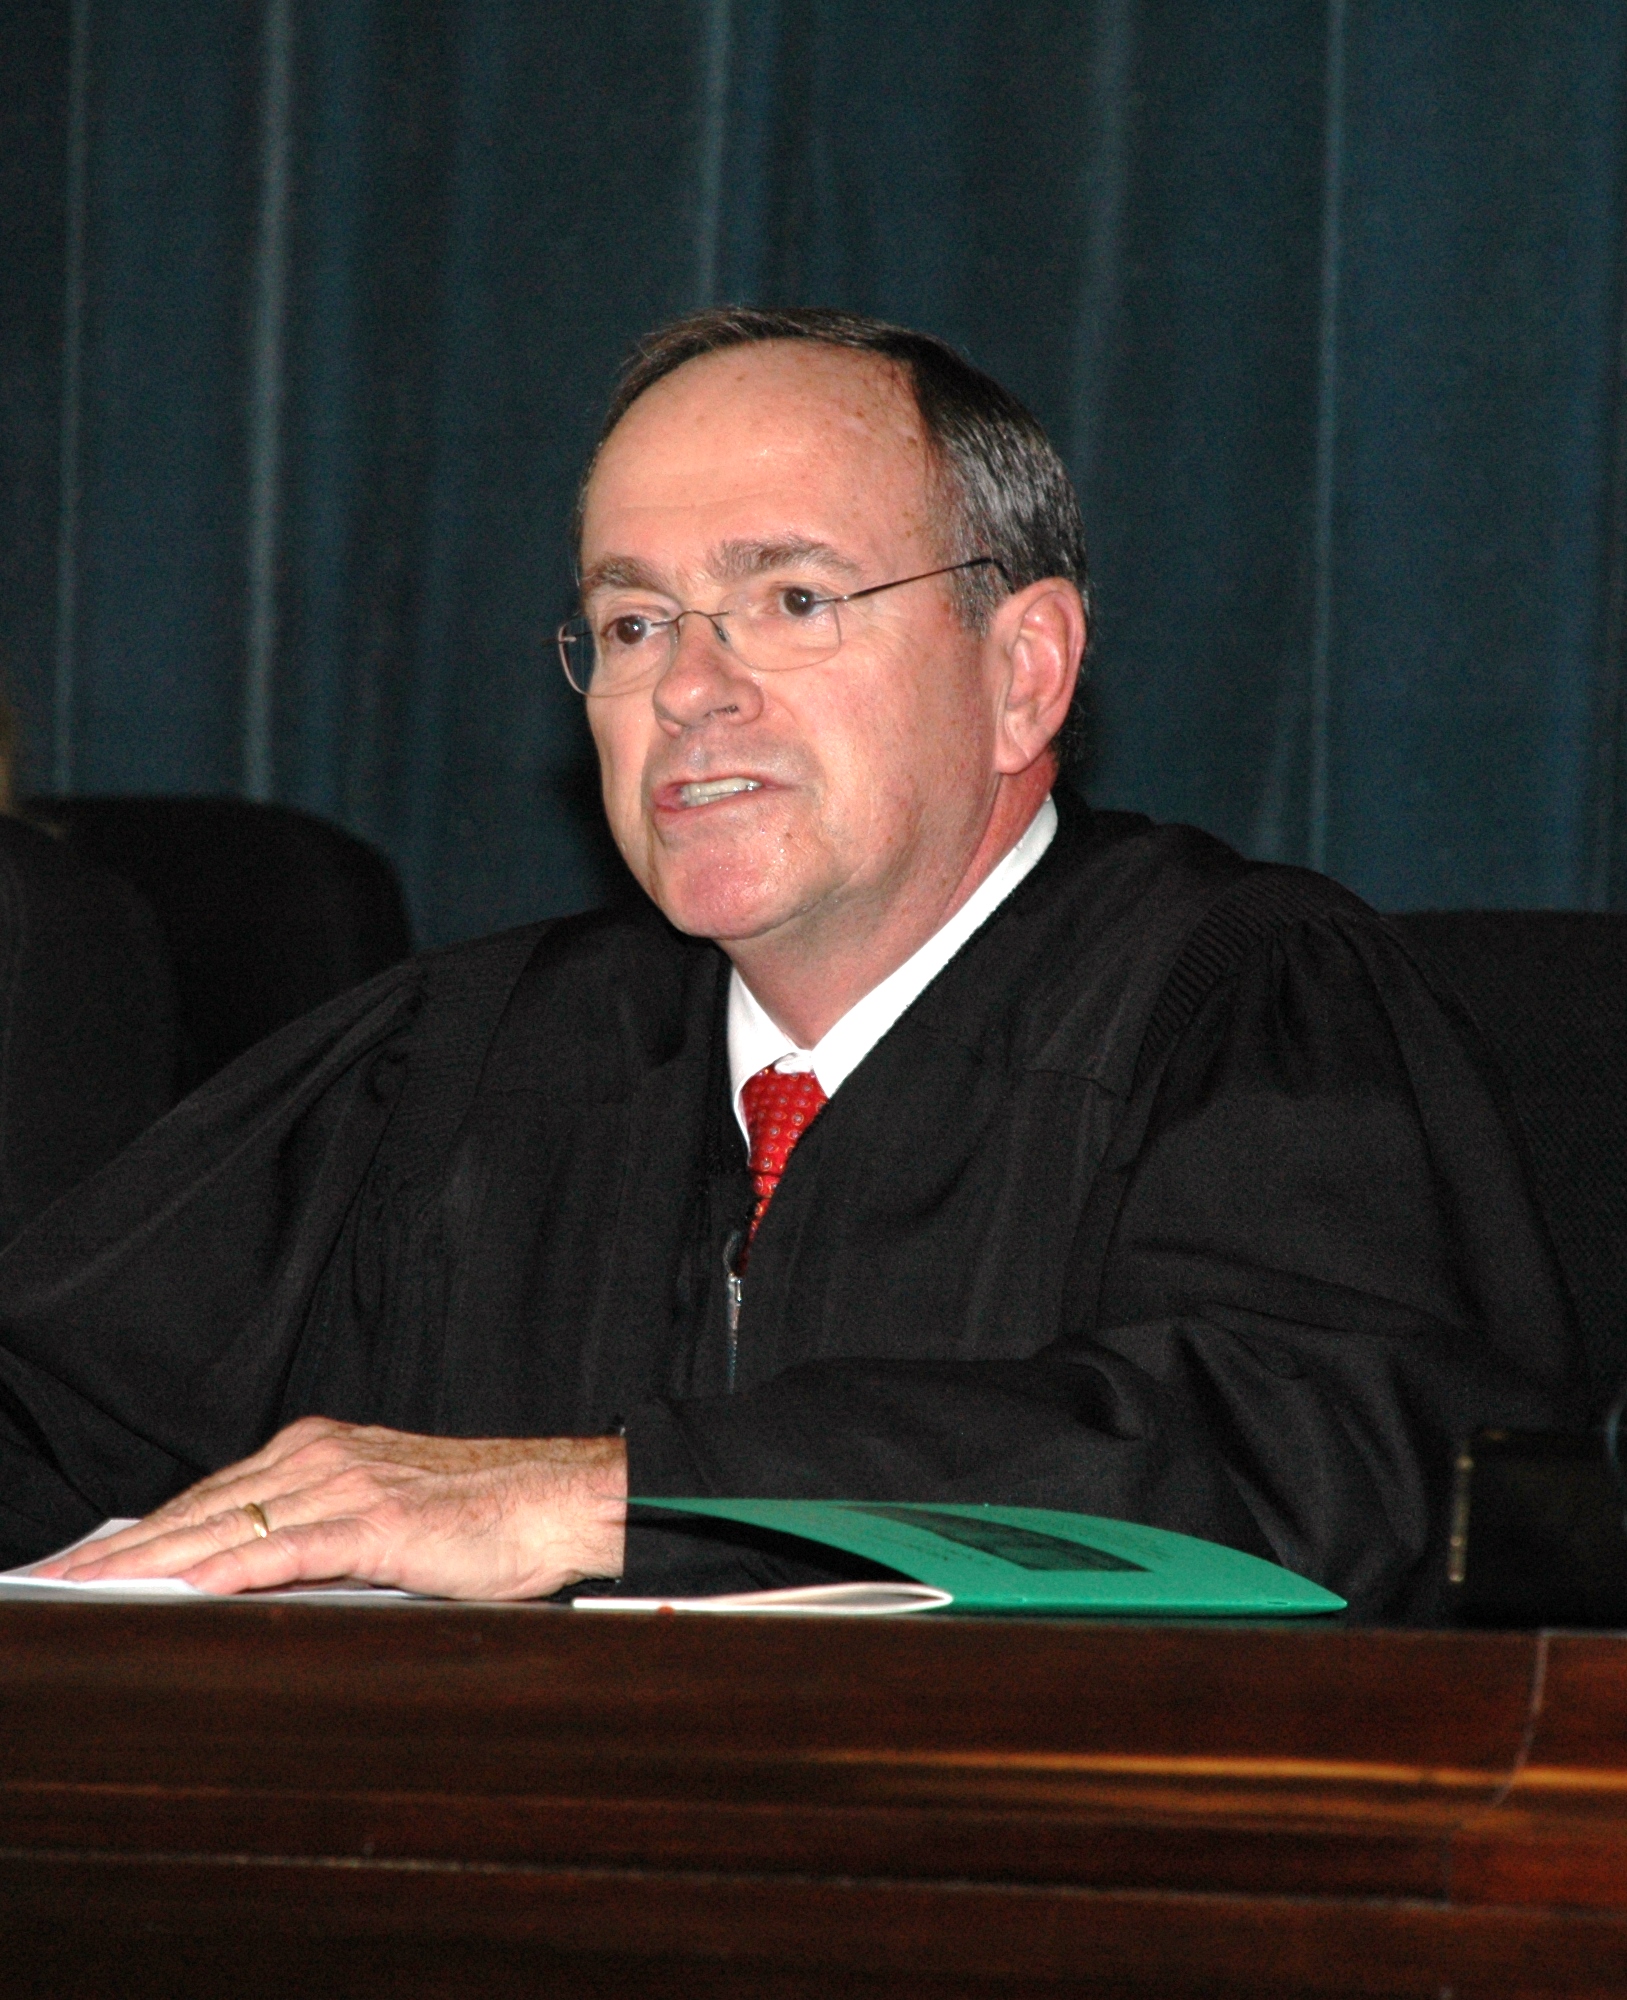 Former Chief Judge Martin Inducted Into Council of Chief Judges of the